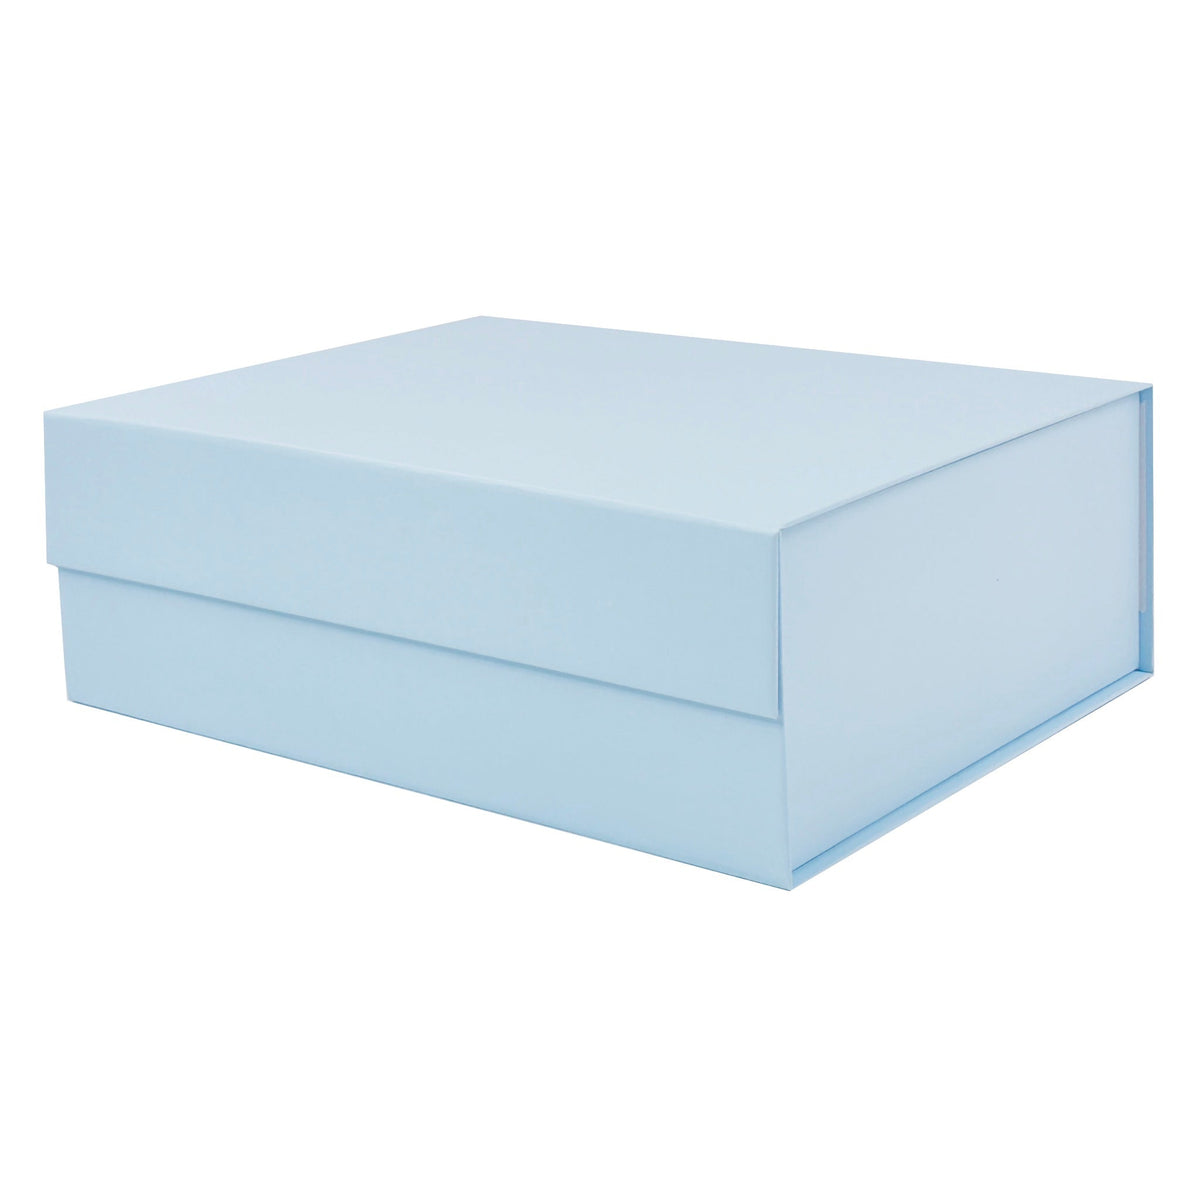 Powder Blue A4 Deep Magnetic Gift Boxes